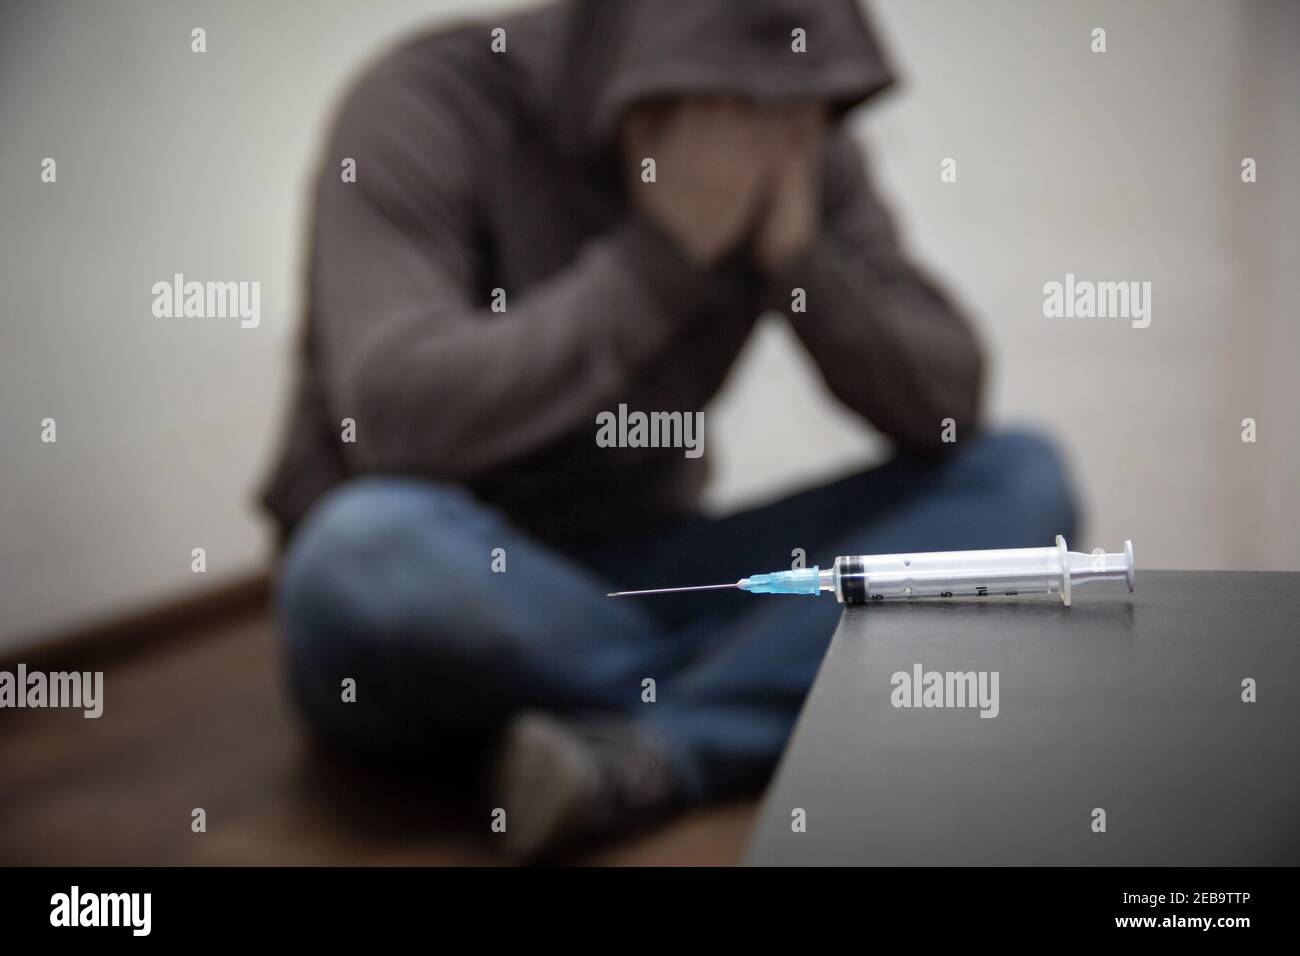 Syringe and man drug addict without of focus sitting in corner in the background. With copy space Stock Photo